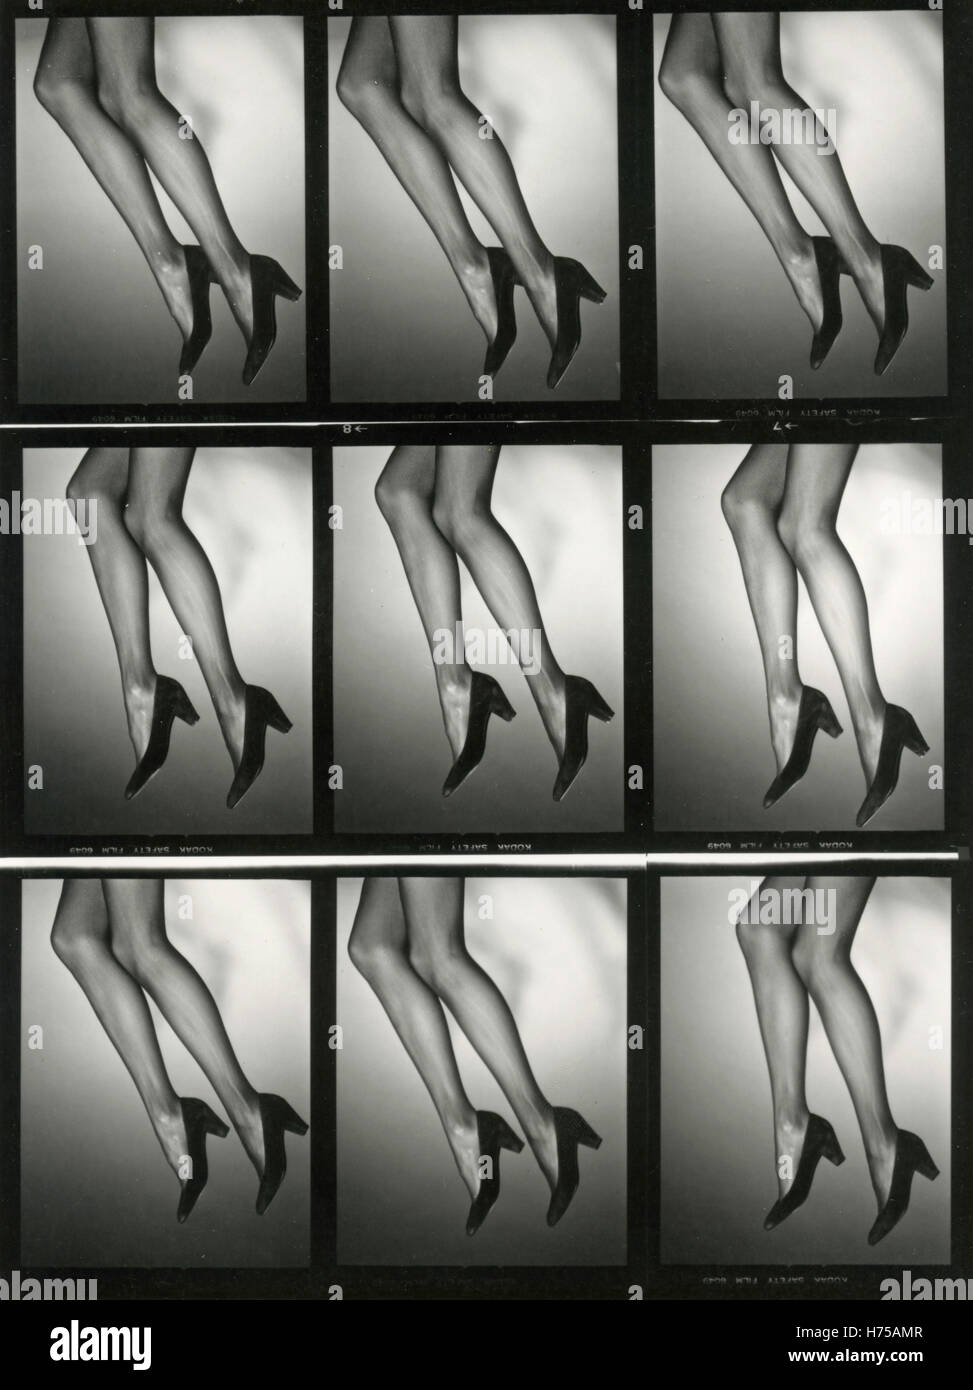 Model wearing stockings by Christian Dior, Paris, France 1984 Stock Photo